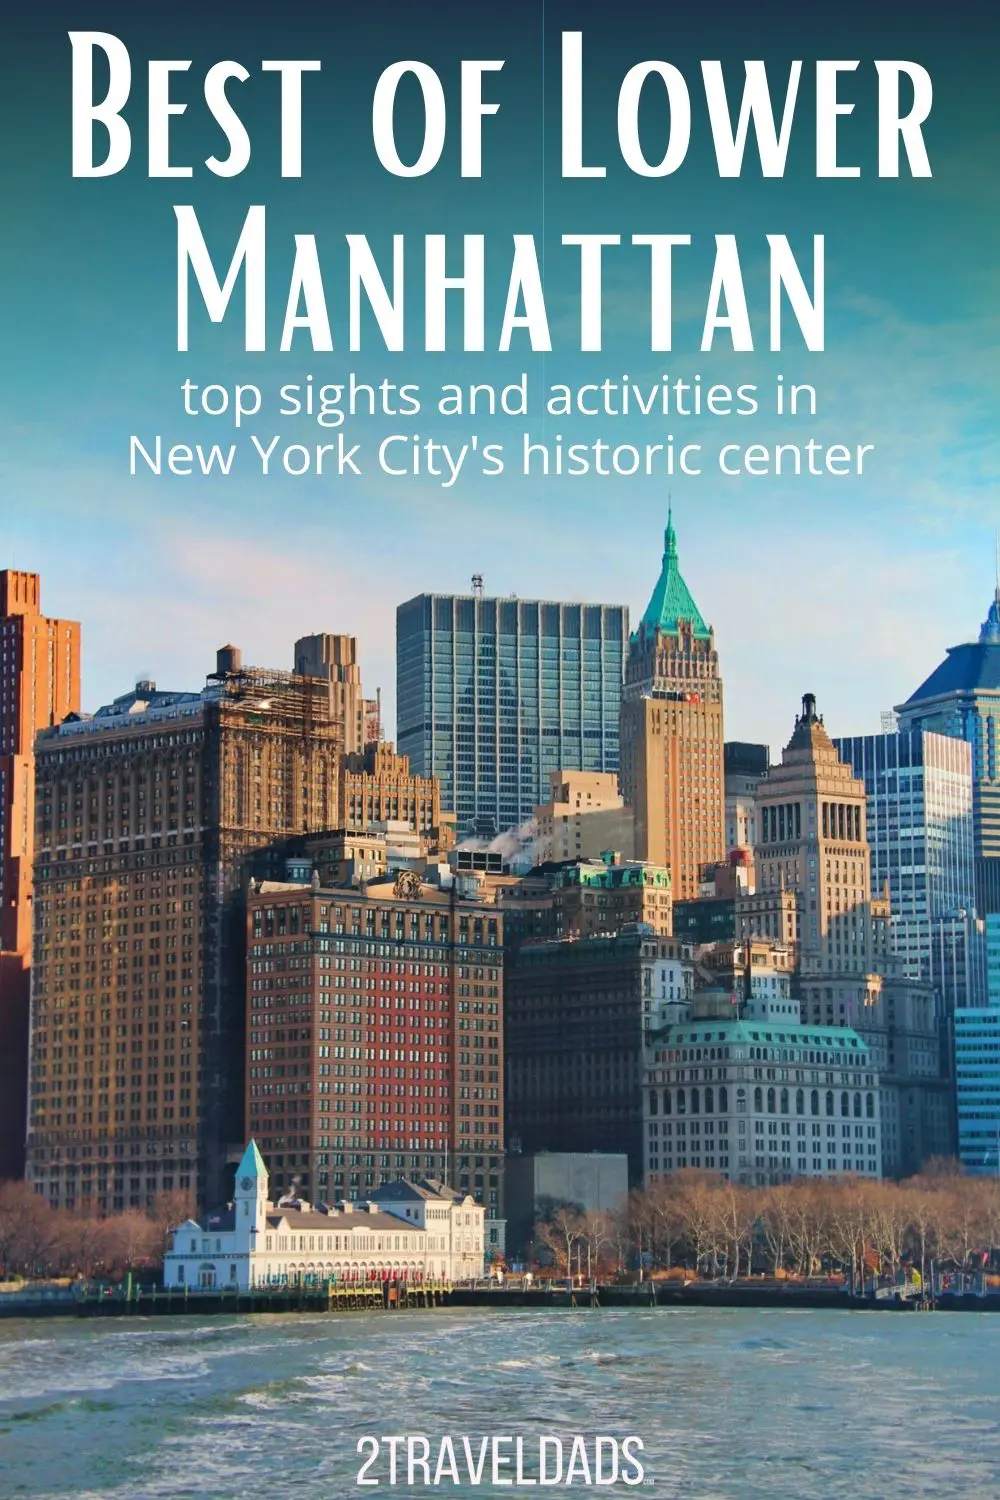 Lower Manhattan is the historic center of New York City. Discover the best NYC historic sites from Wall Street to how to get to the Statue of Liberty. Interesting museums and free things to do in New York.